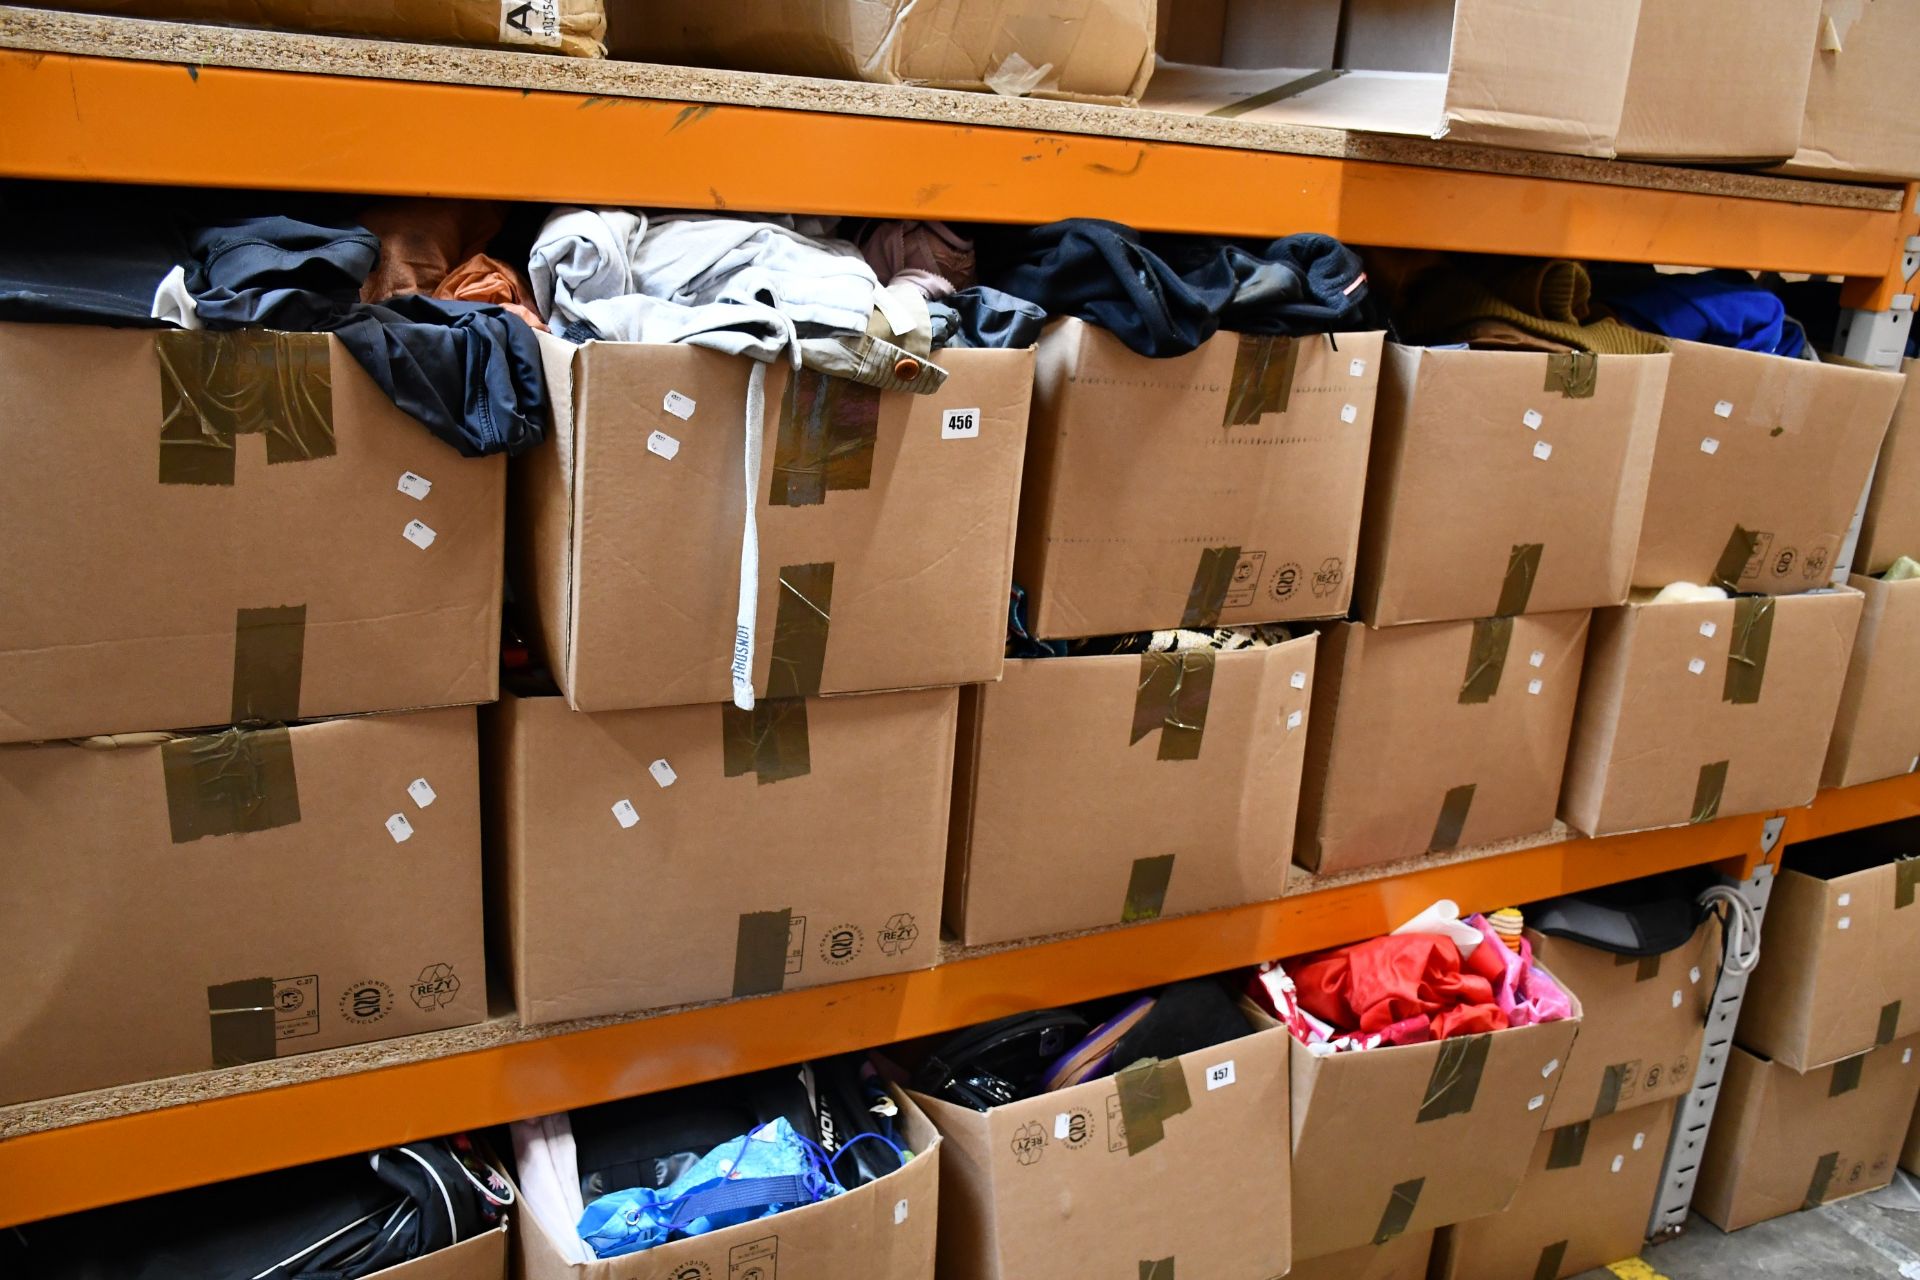 Ten boxes of assorted clothing and related items.